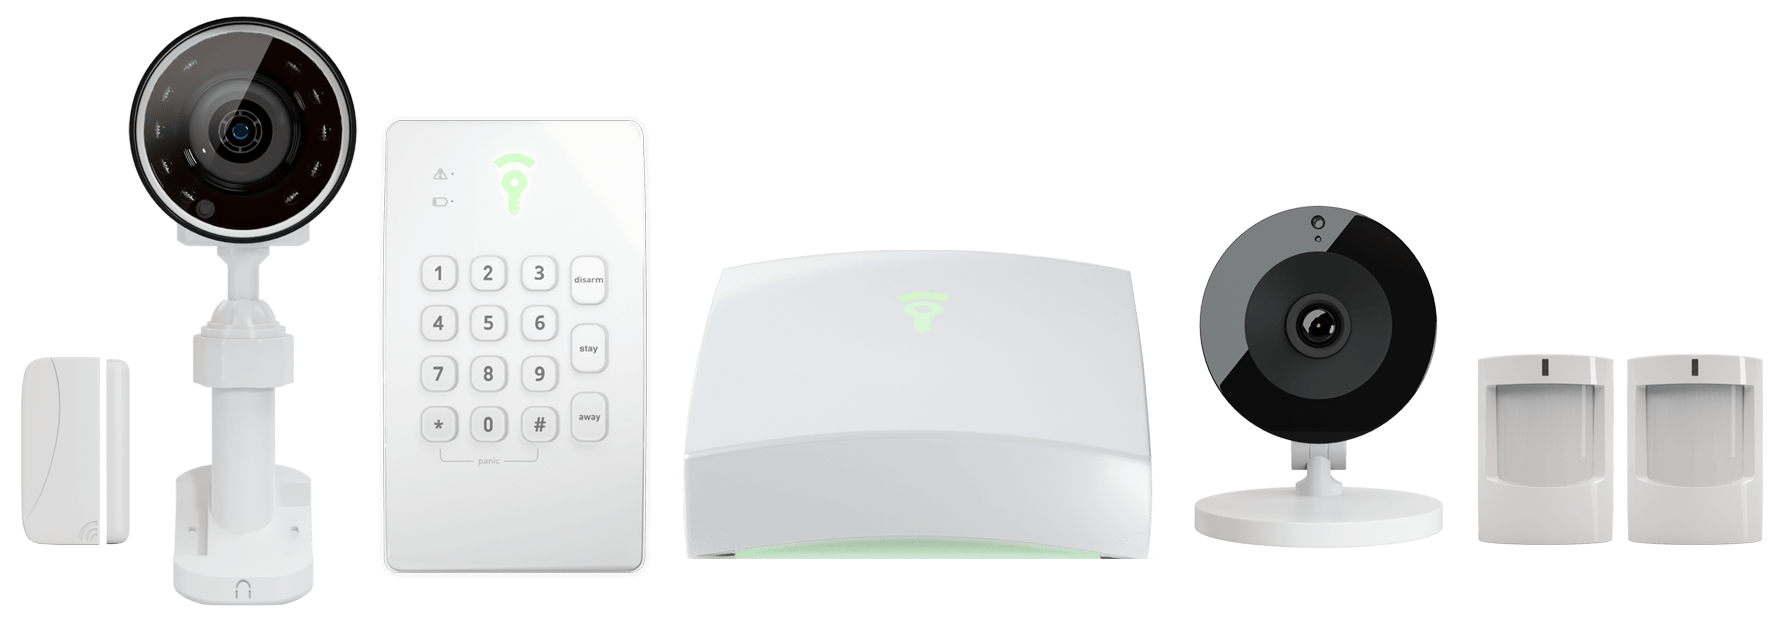 Best Home Security Systems Without a Landline in 2022